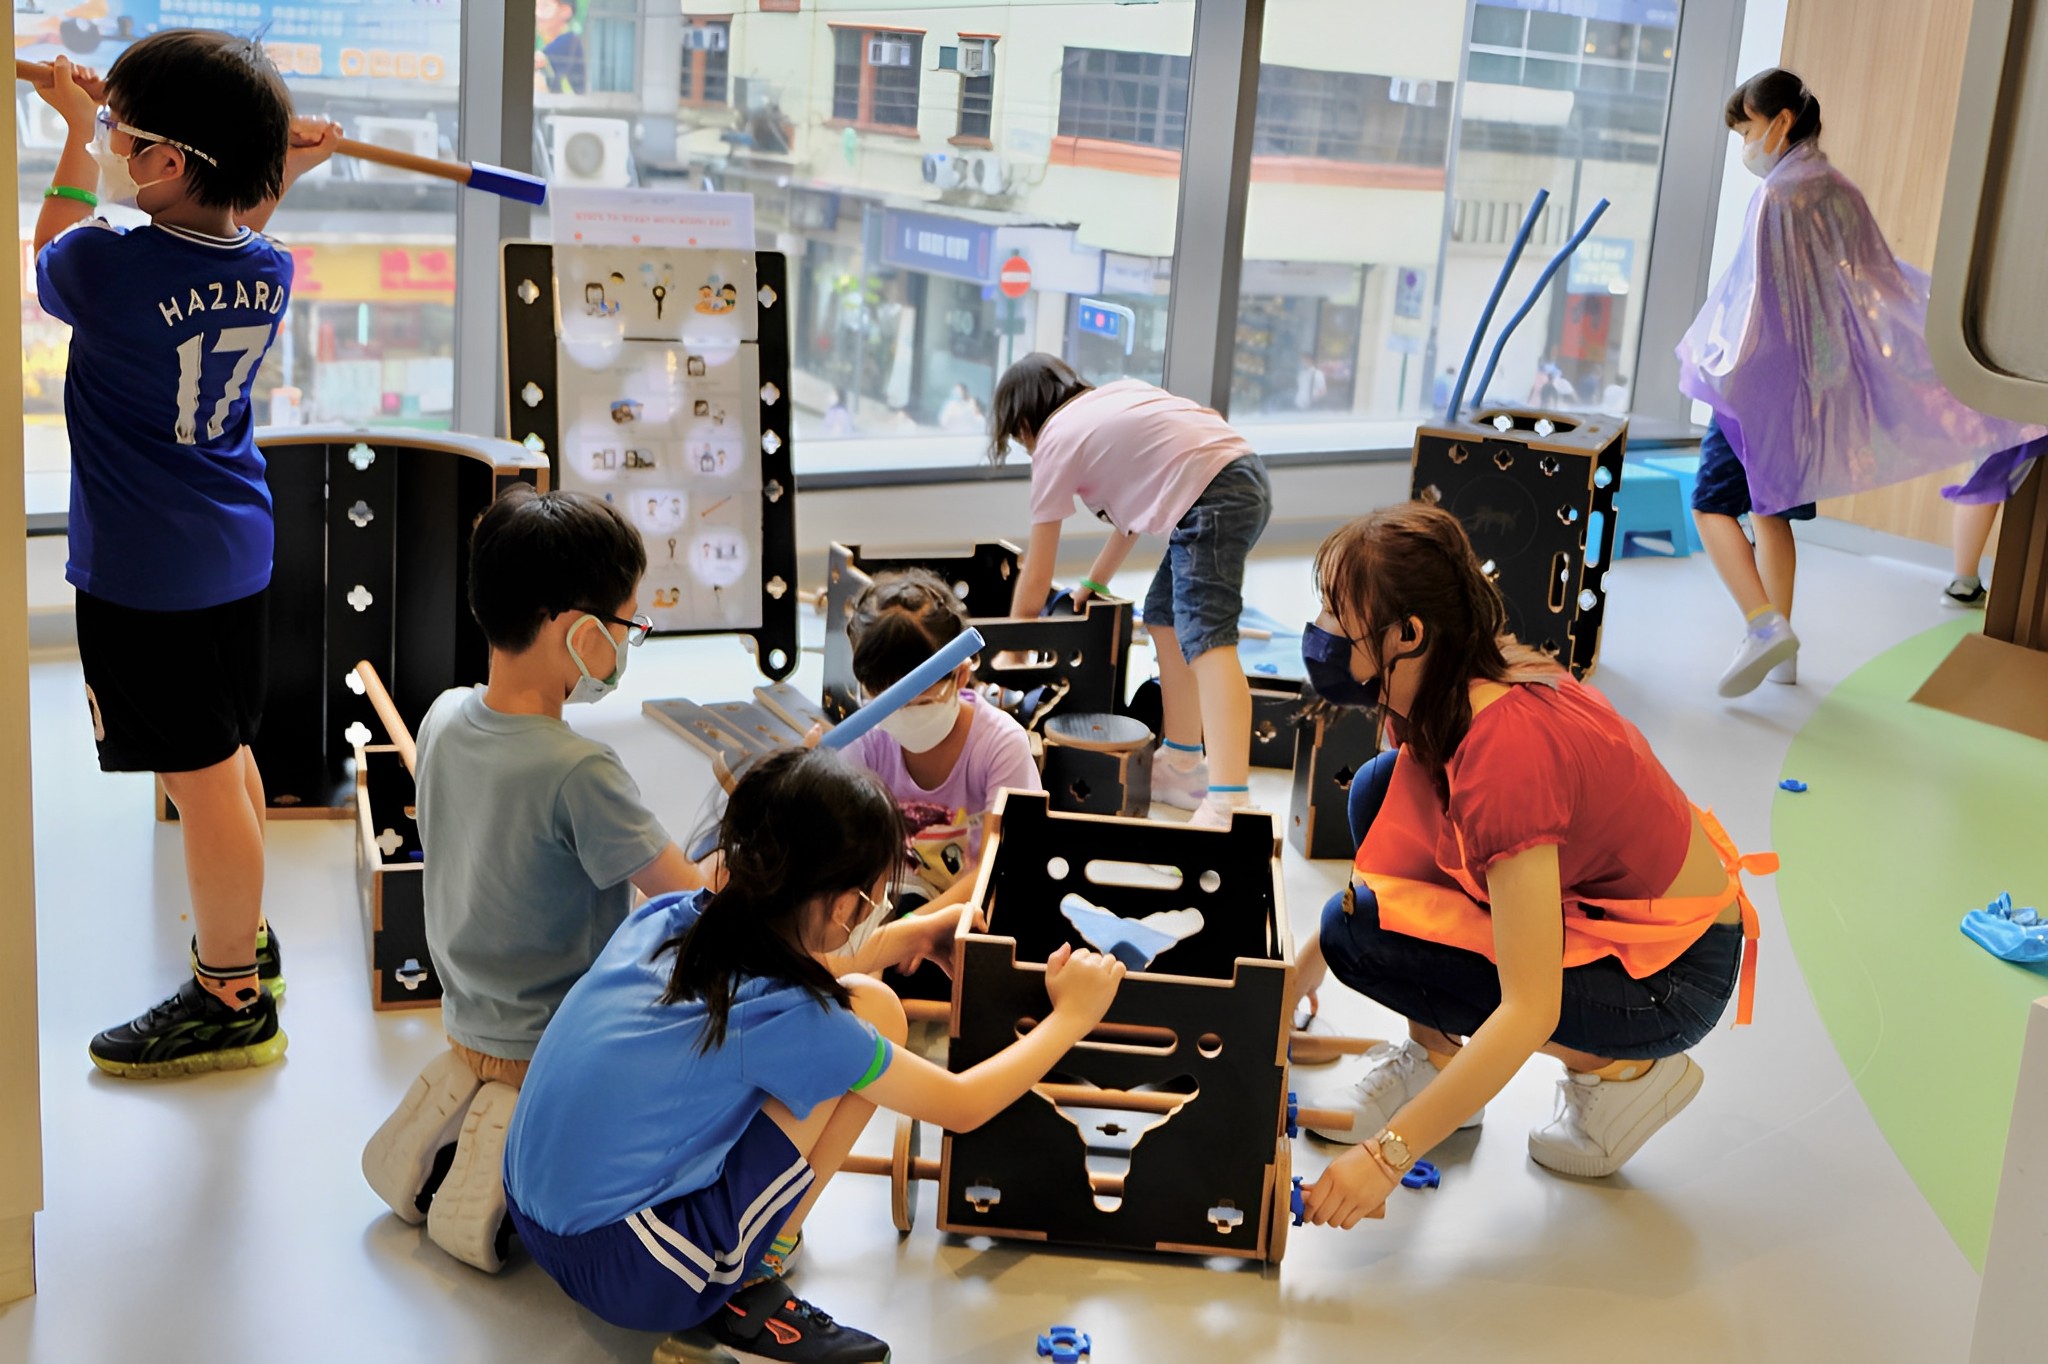 The Build It section has Nüdel Karts that help kids work on their creativity, problem-solving and social skills.